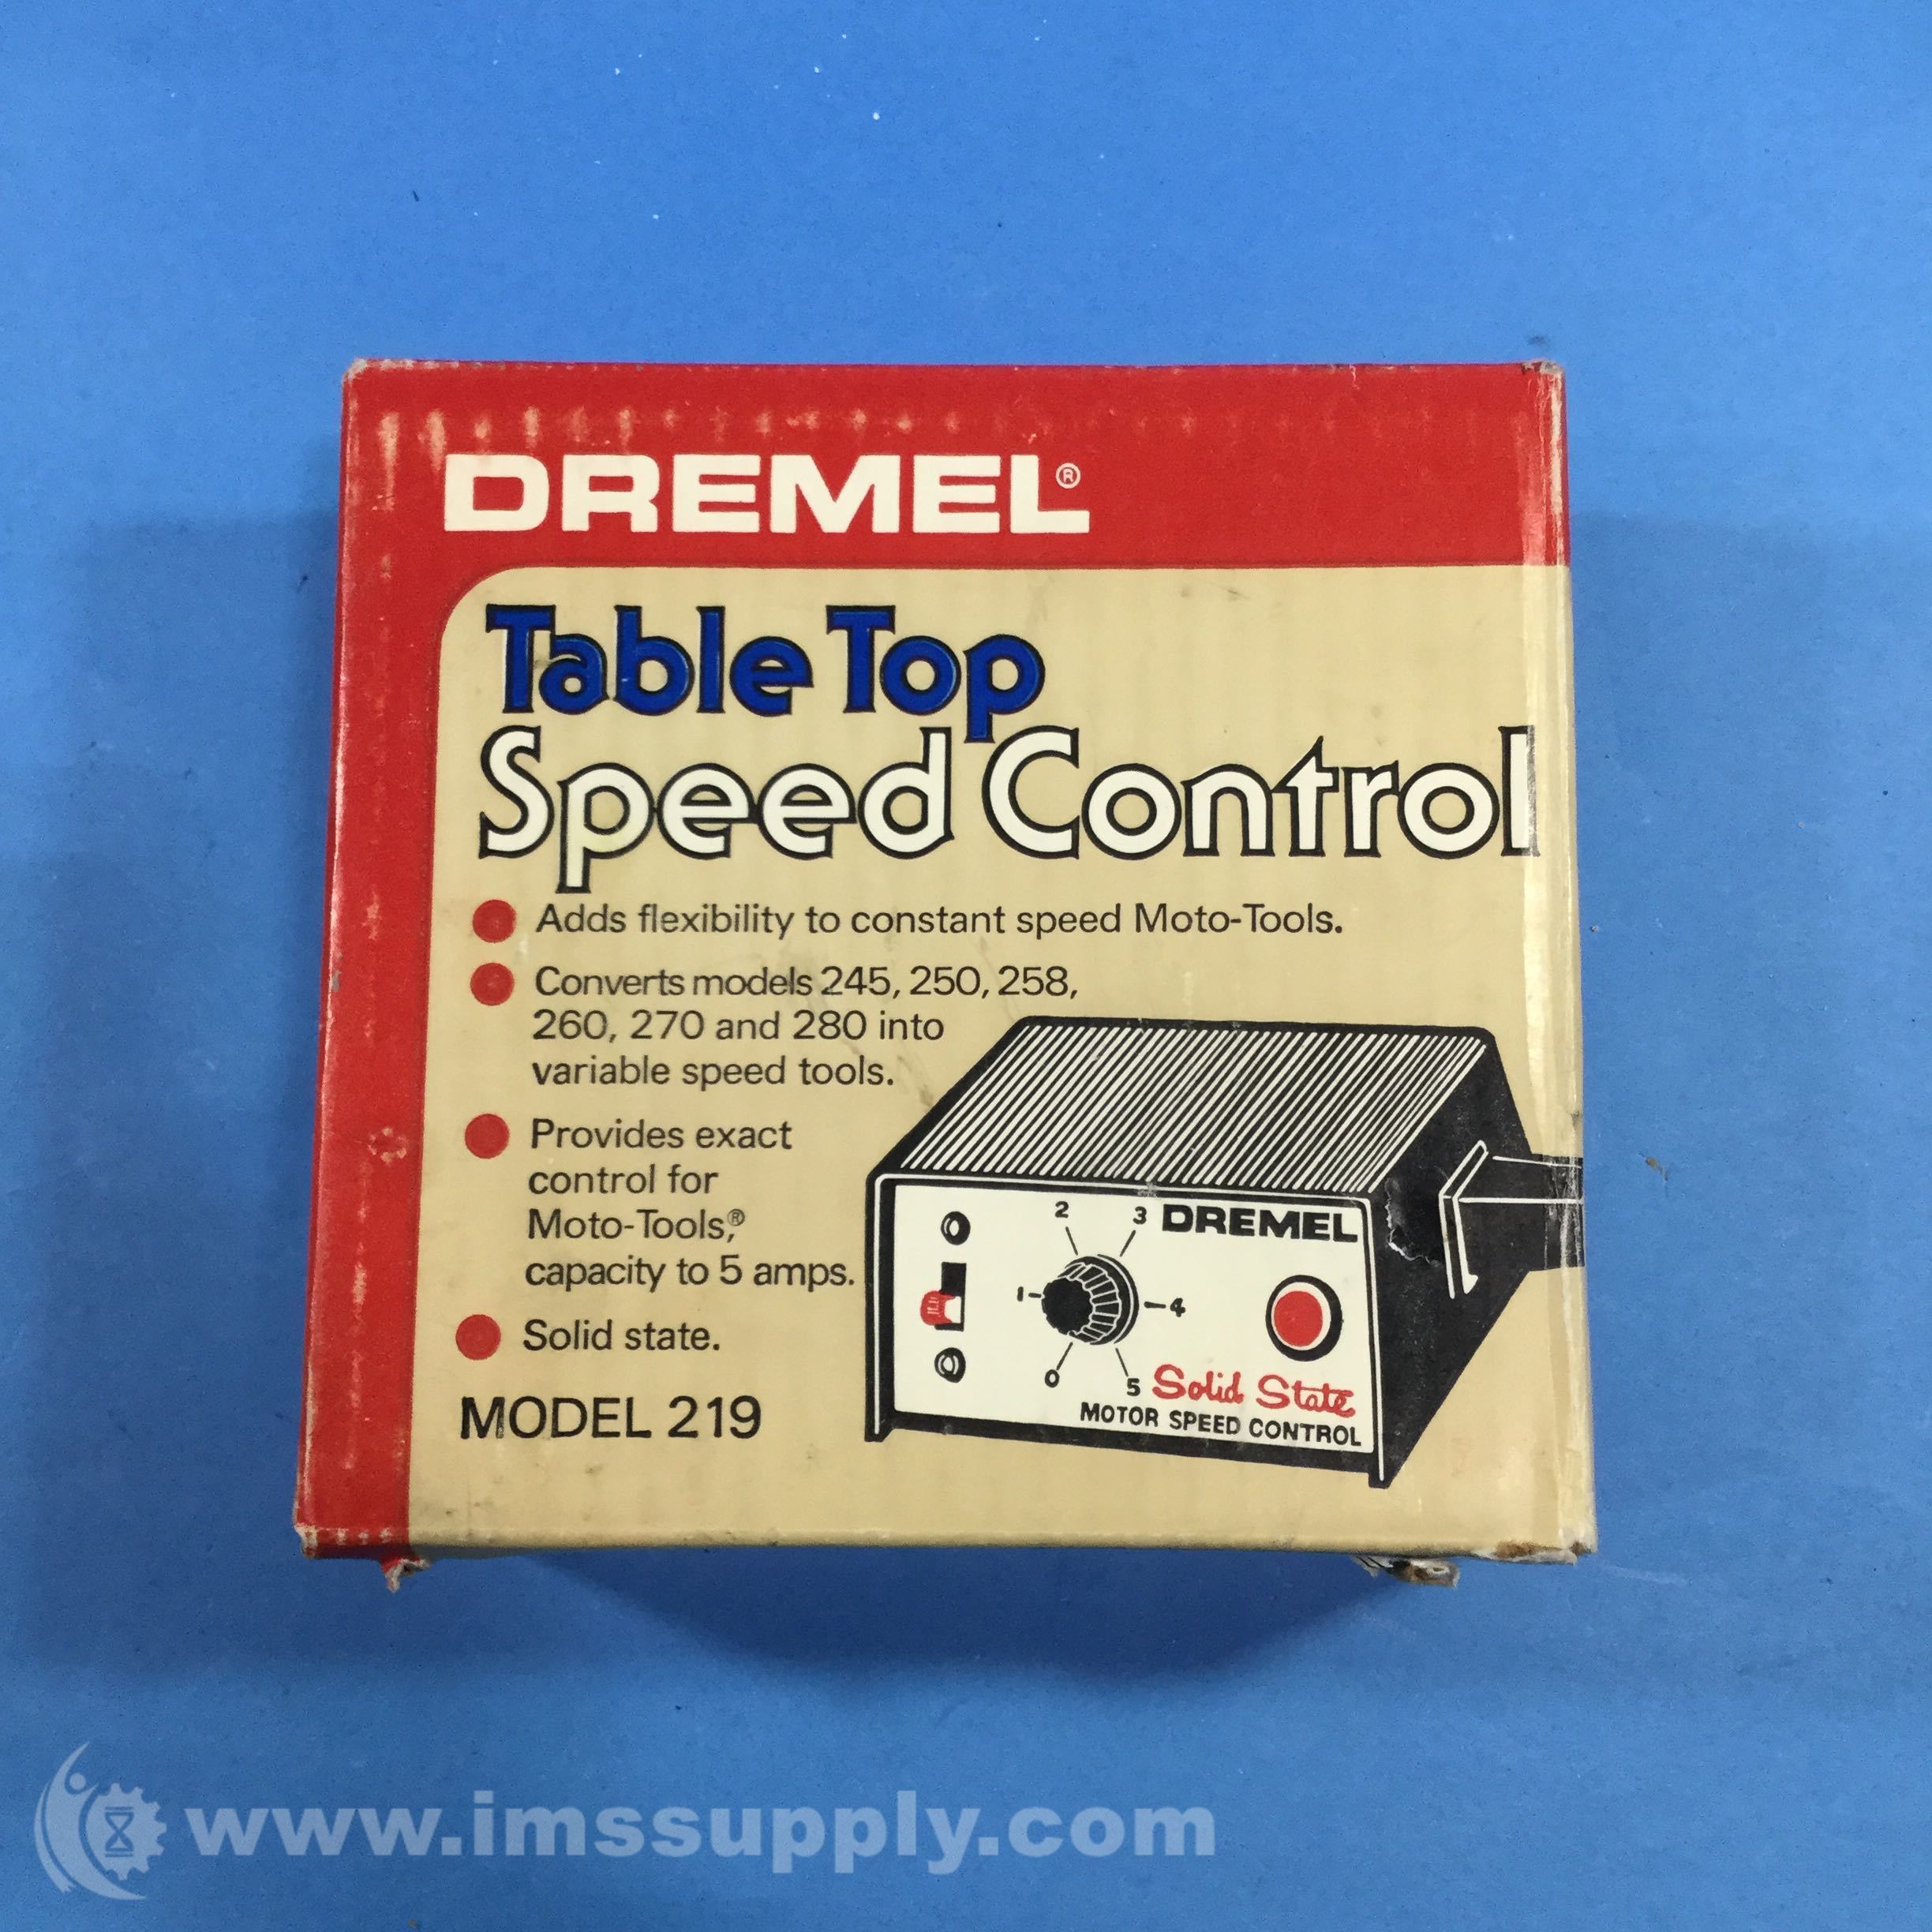 Dremel 219 Table Top Speed Control - IMS Supply